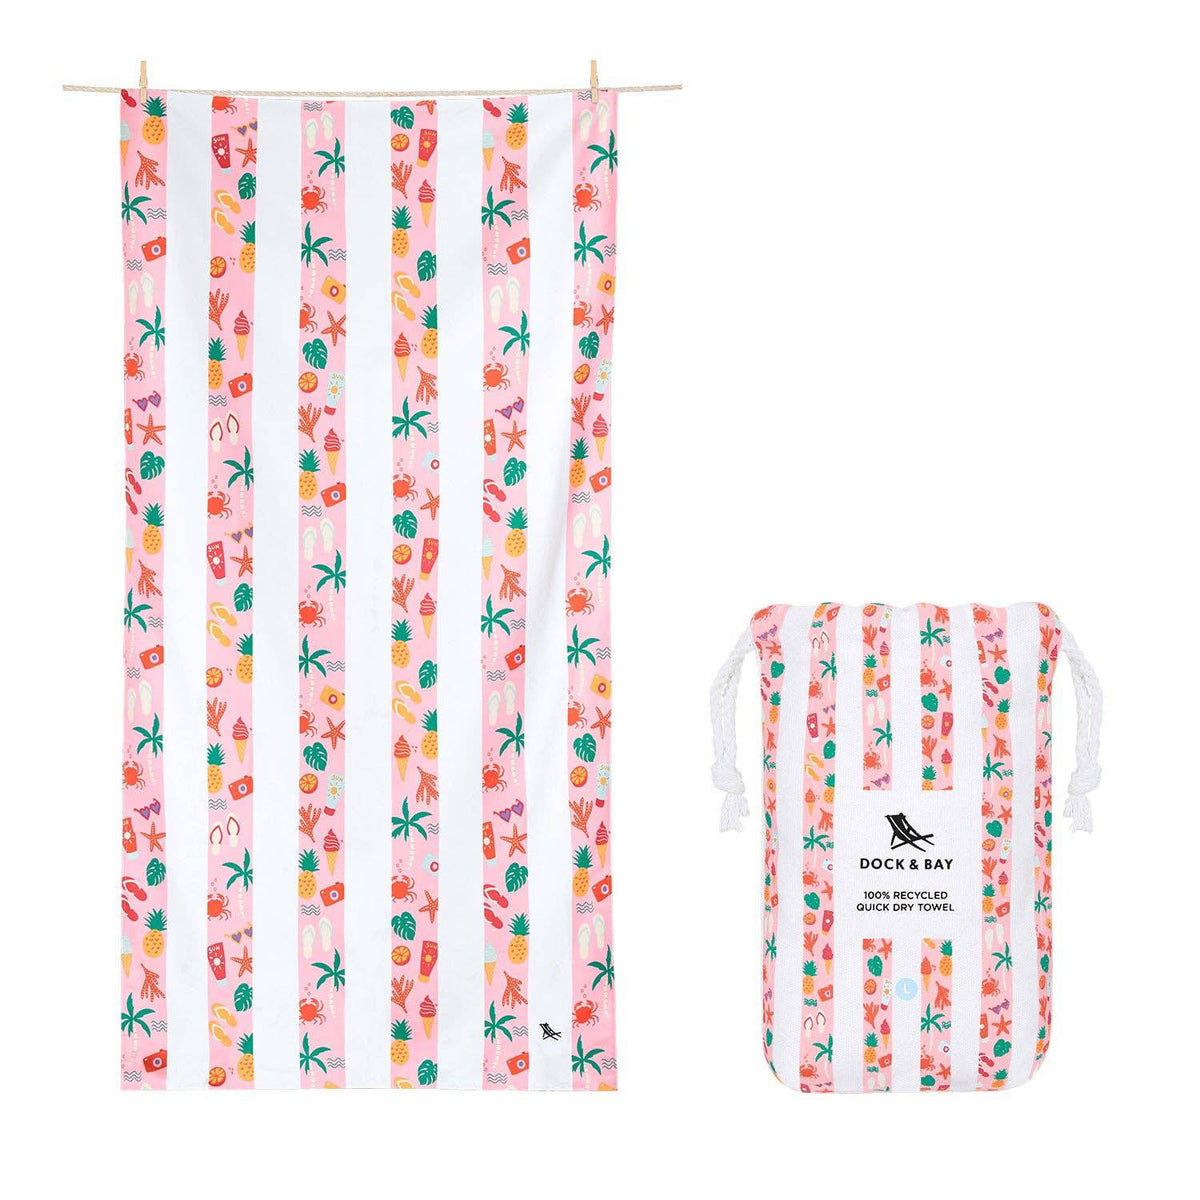 Vacay Vibes Kids Dock &amp; Bay Quick Dry Towel - 2 sizes - The Preppy Bunny